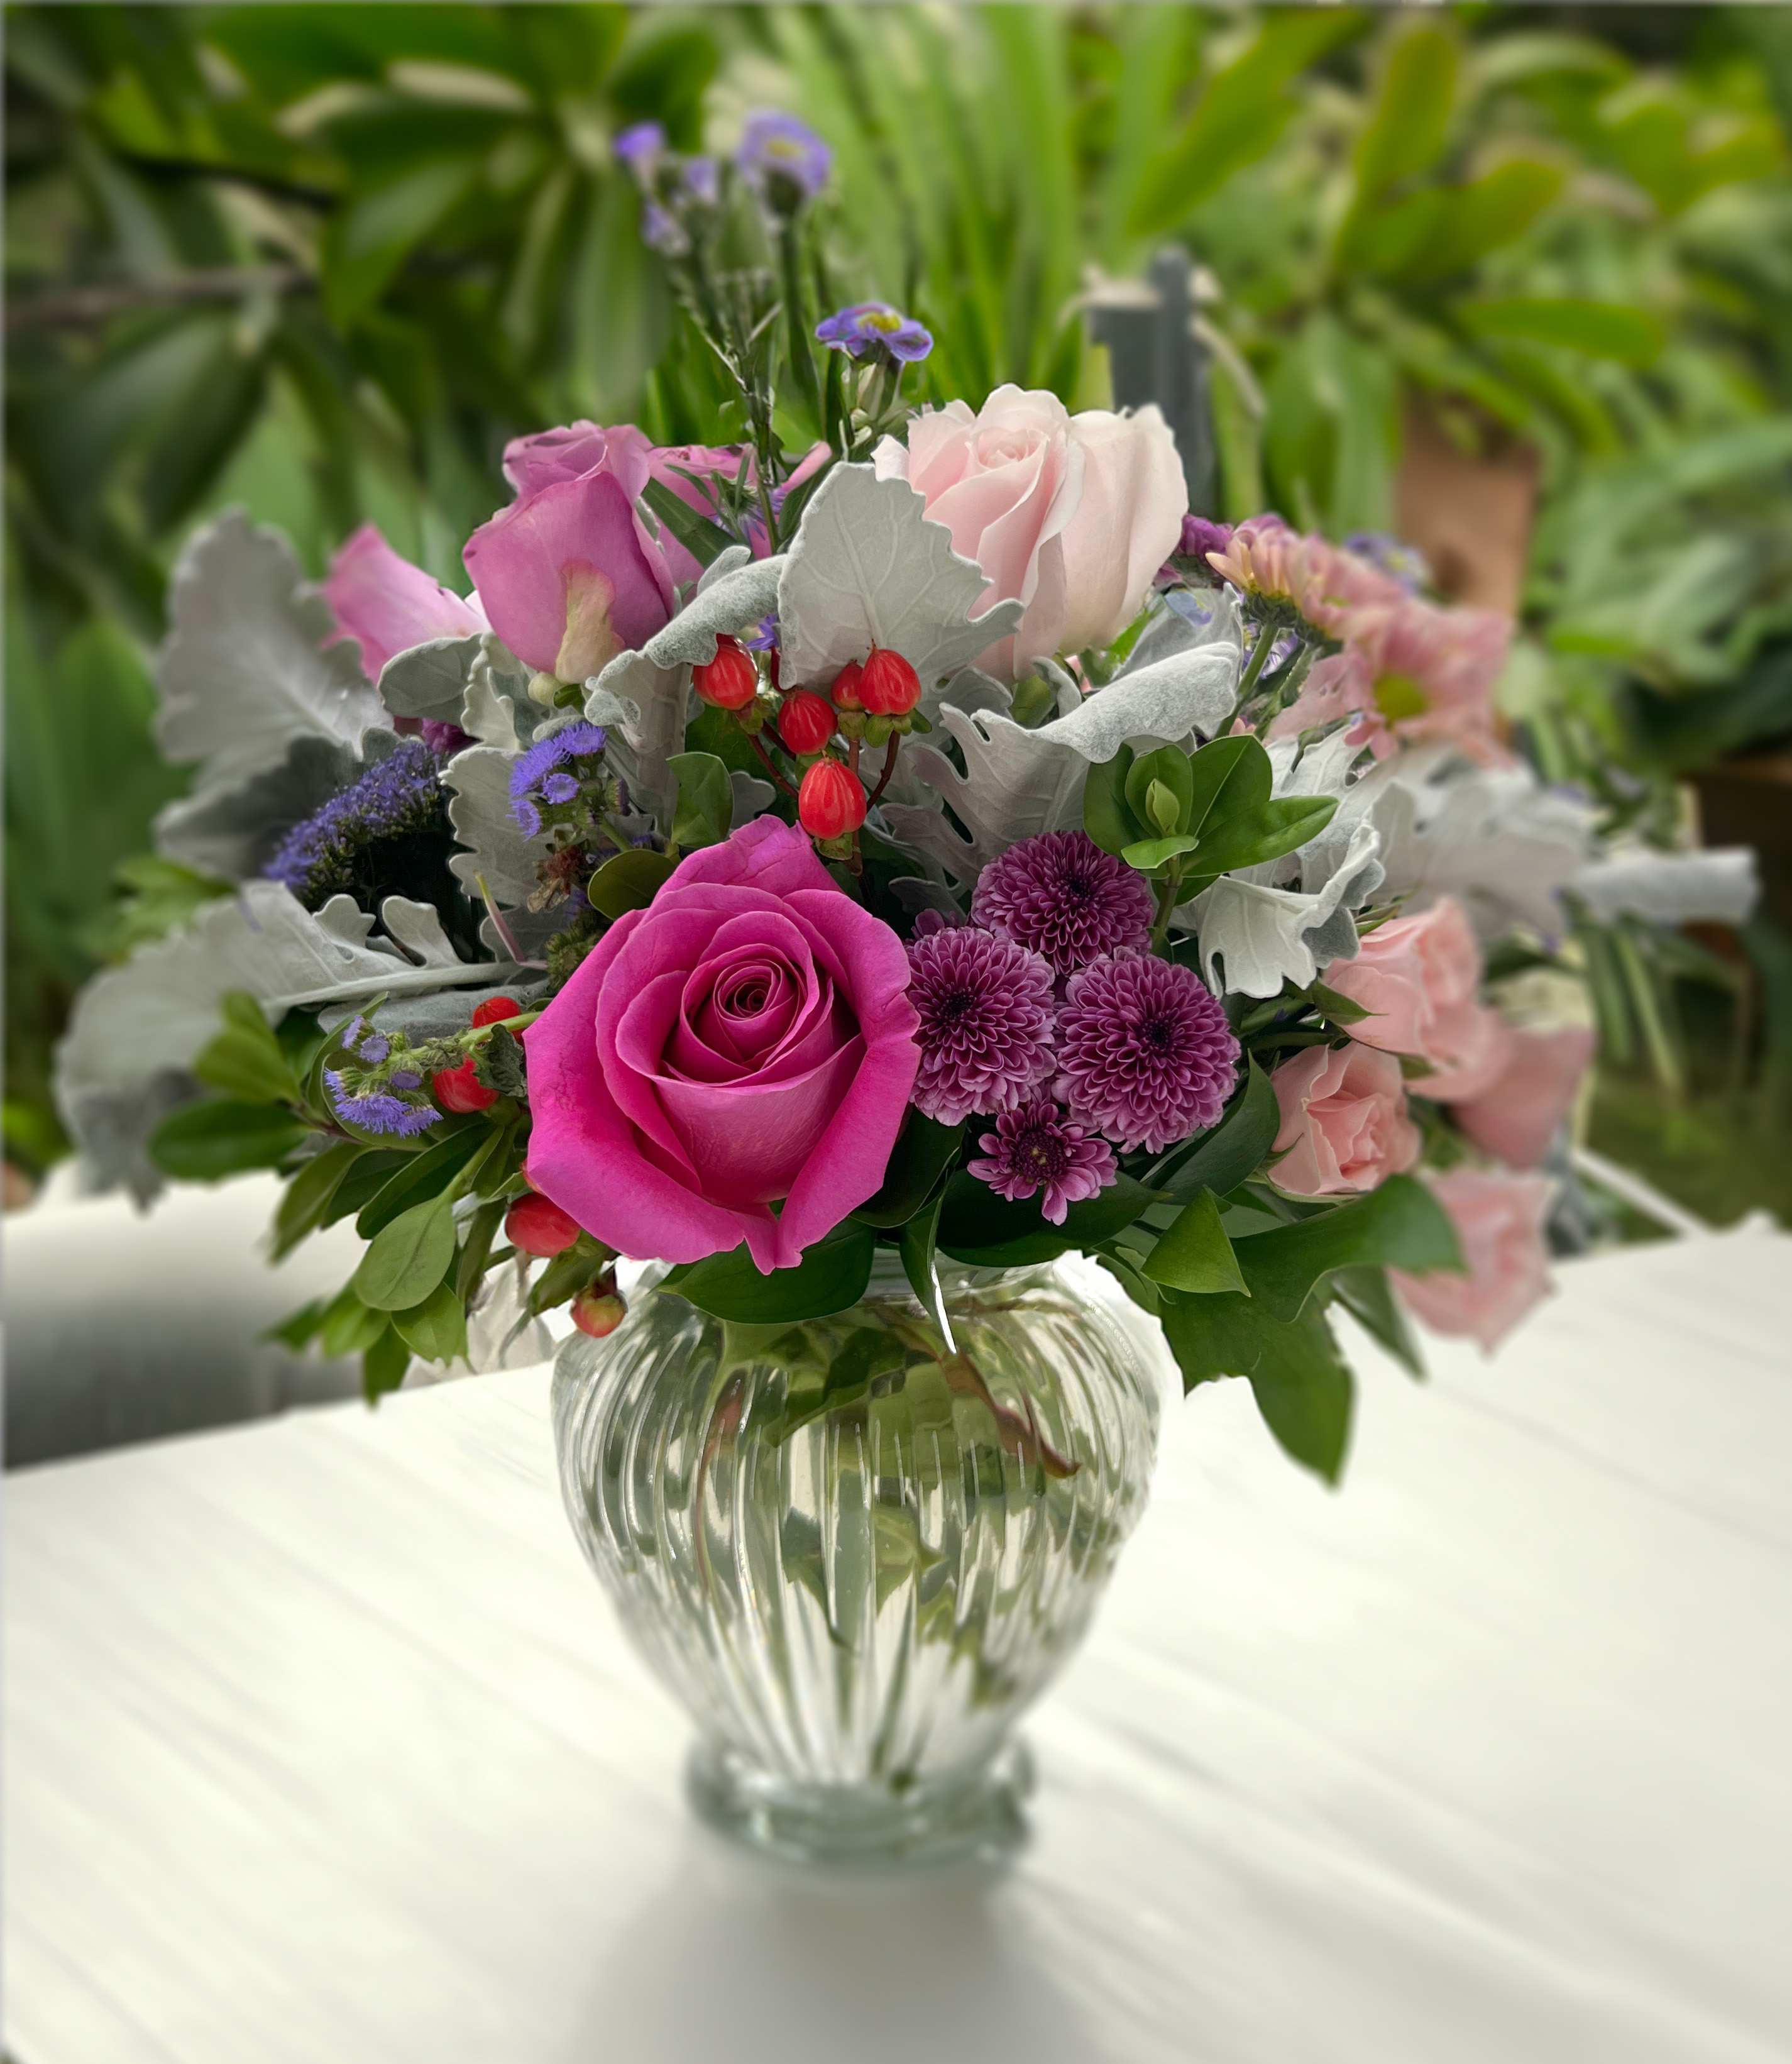 Low-Key Hues  - Soft colored mixed bouquet.